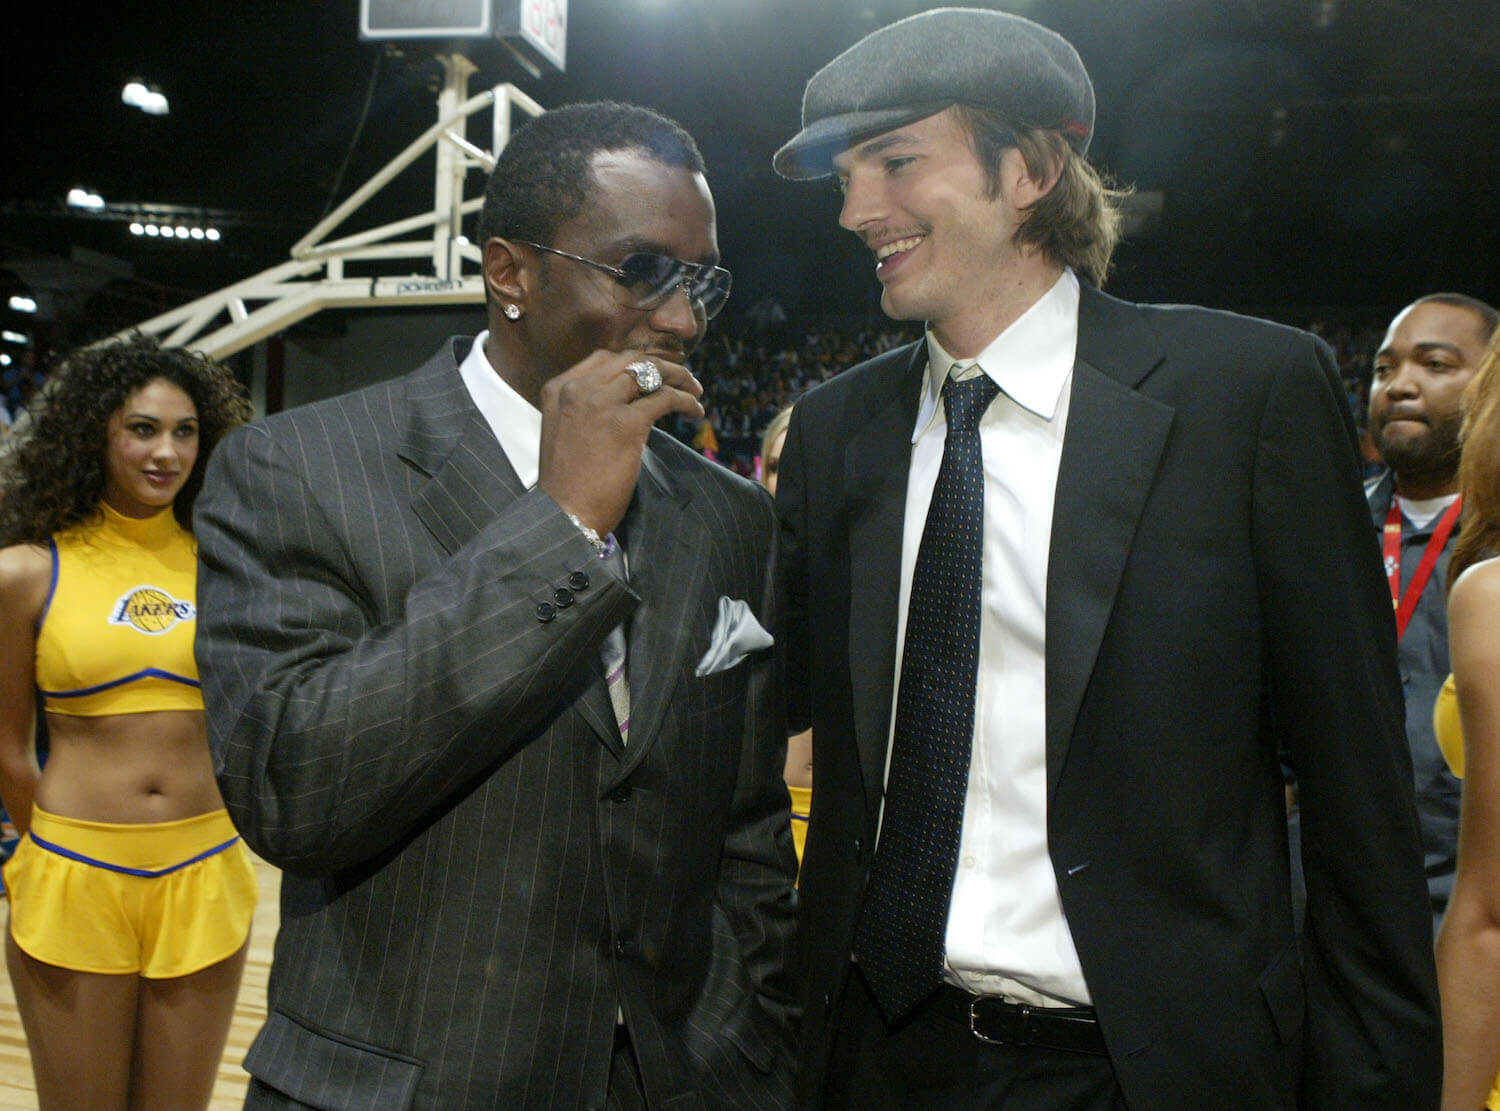 Sean 'P. Diddy' Combs and Ashton Kutcher at the NBA All-Star Celebrity Game at the Los Angeles Convention Center